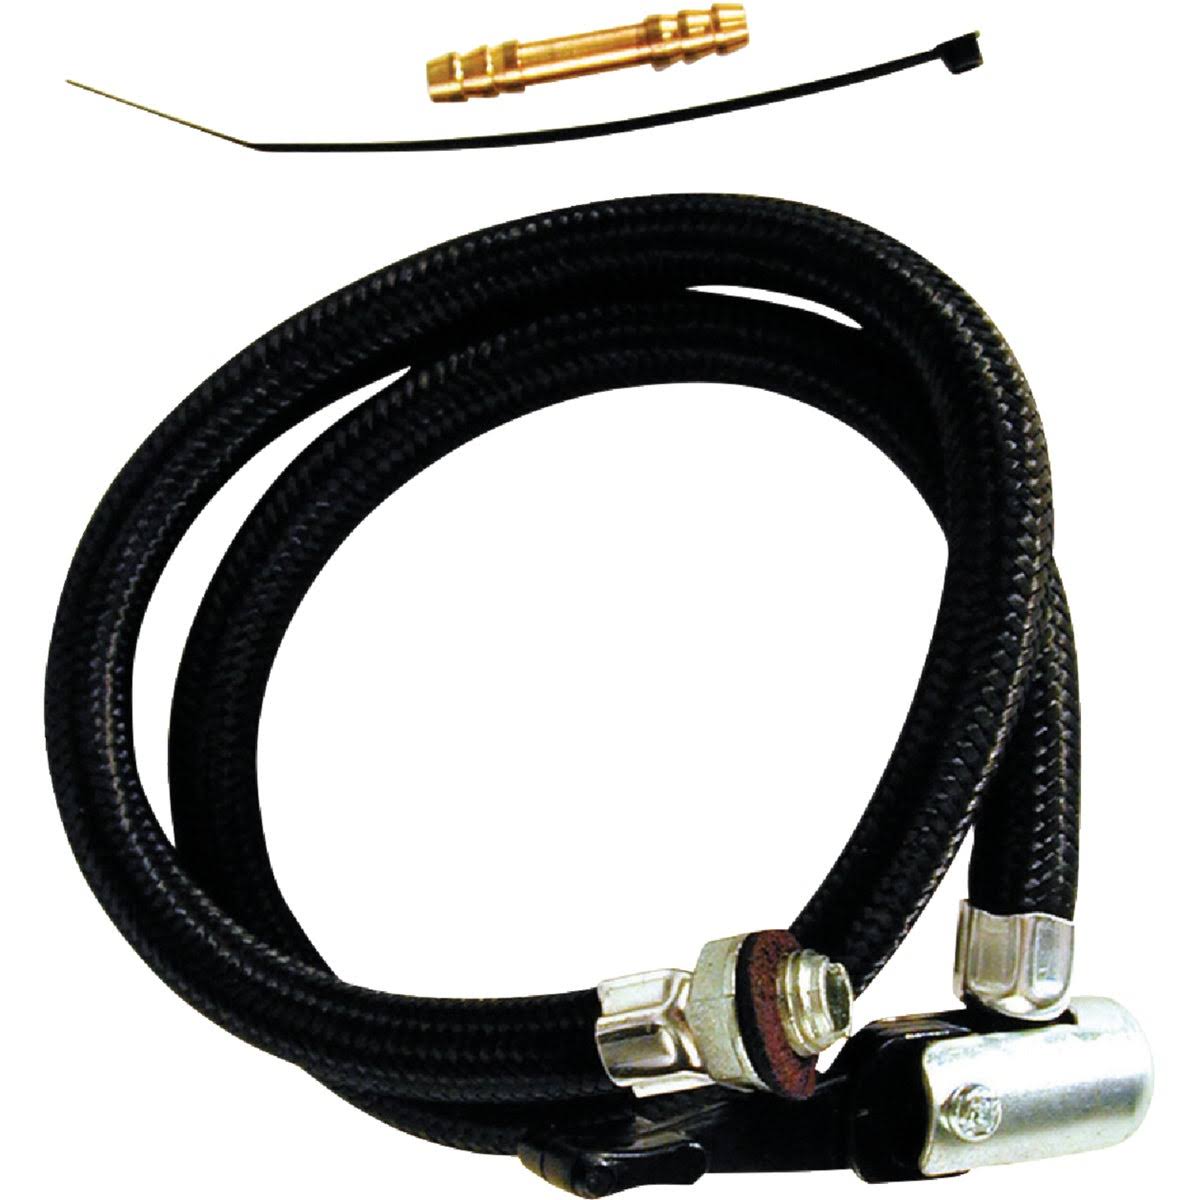 Custom Accessories 36661 72" Hose With Siphon Pump for sale online 